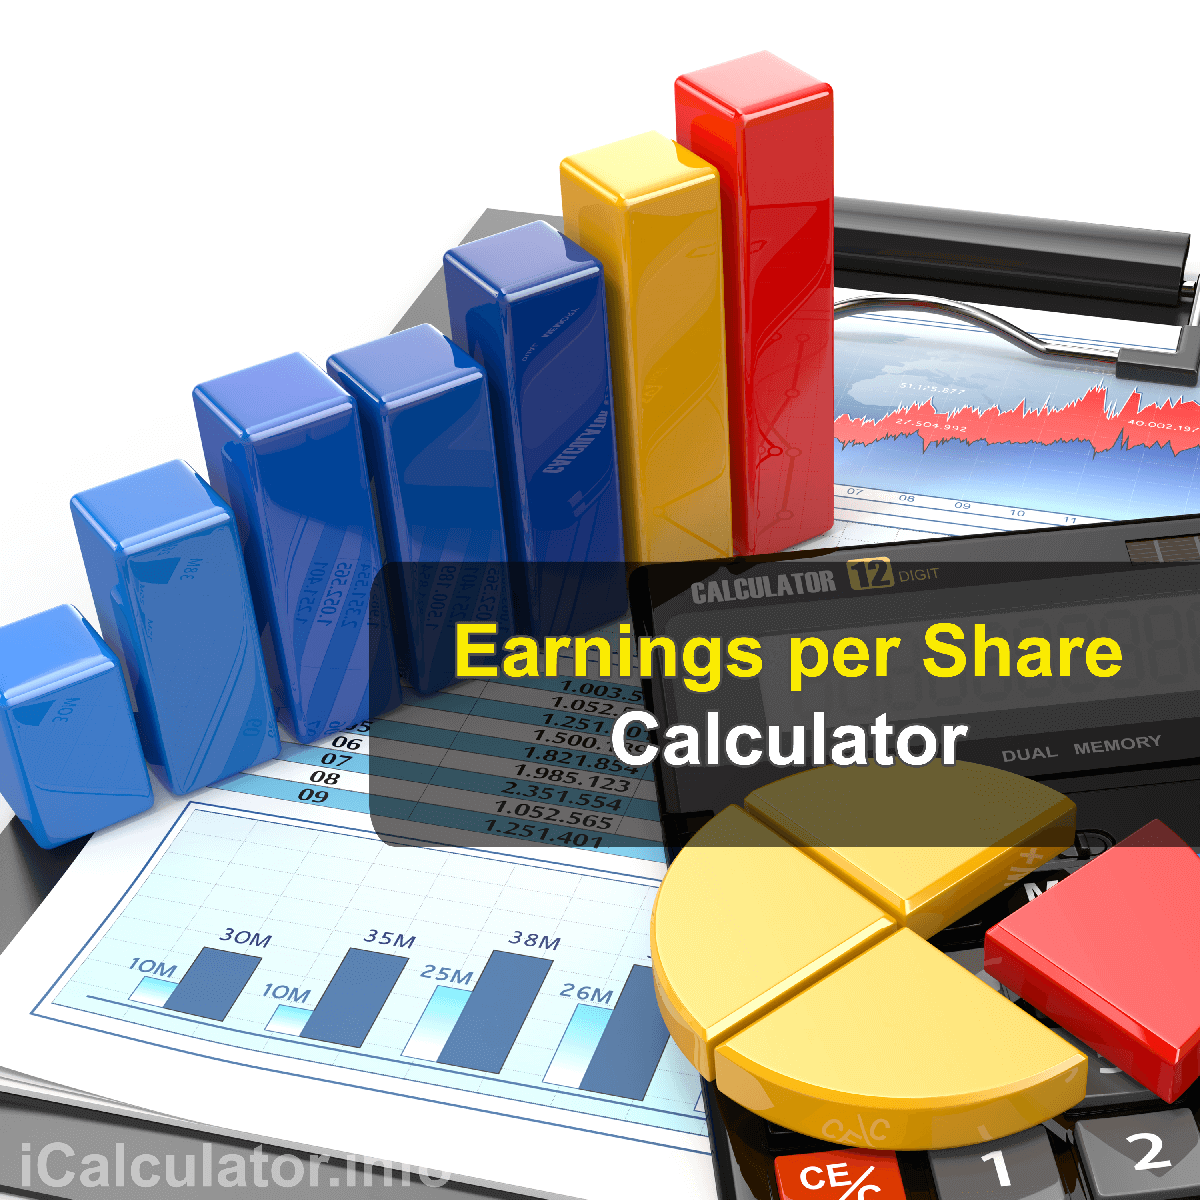 Earnings Per Share Calculator. This image shows a man learning how to calculate earnings per share using a calculator and notepad. By using the earnings per share formula, the EPS Calculator provides a true calculation of company's profit allocation to each share of common stock.